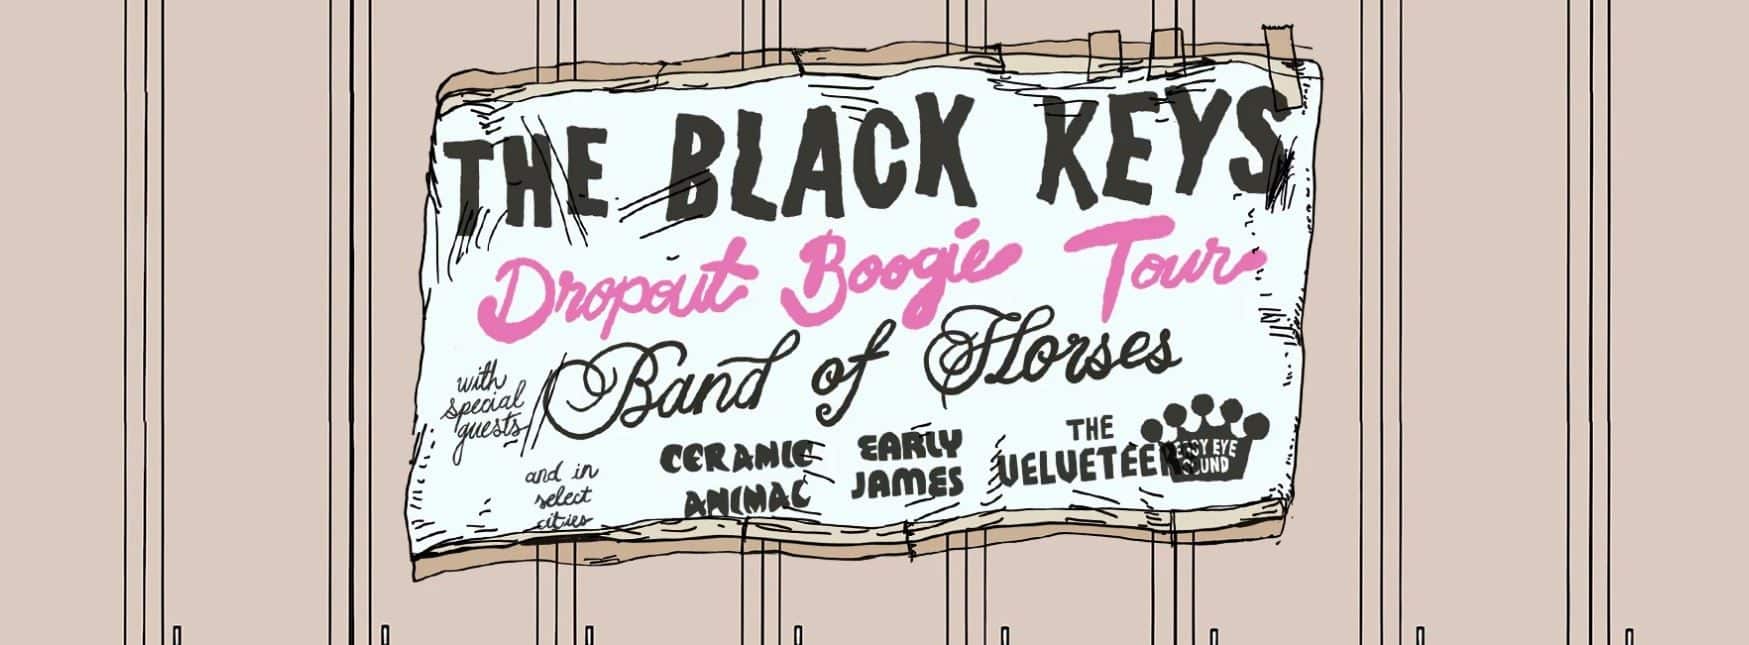 The Black Keys tickets for the Discount Boogie Tour 2022 are on sale this week